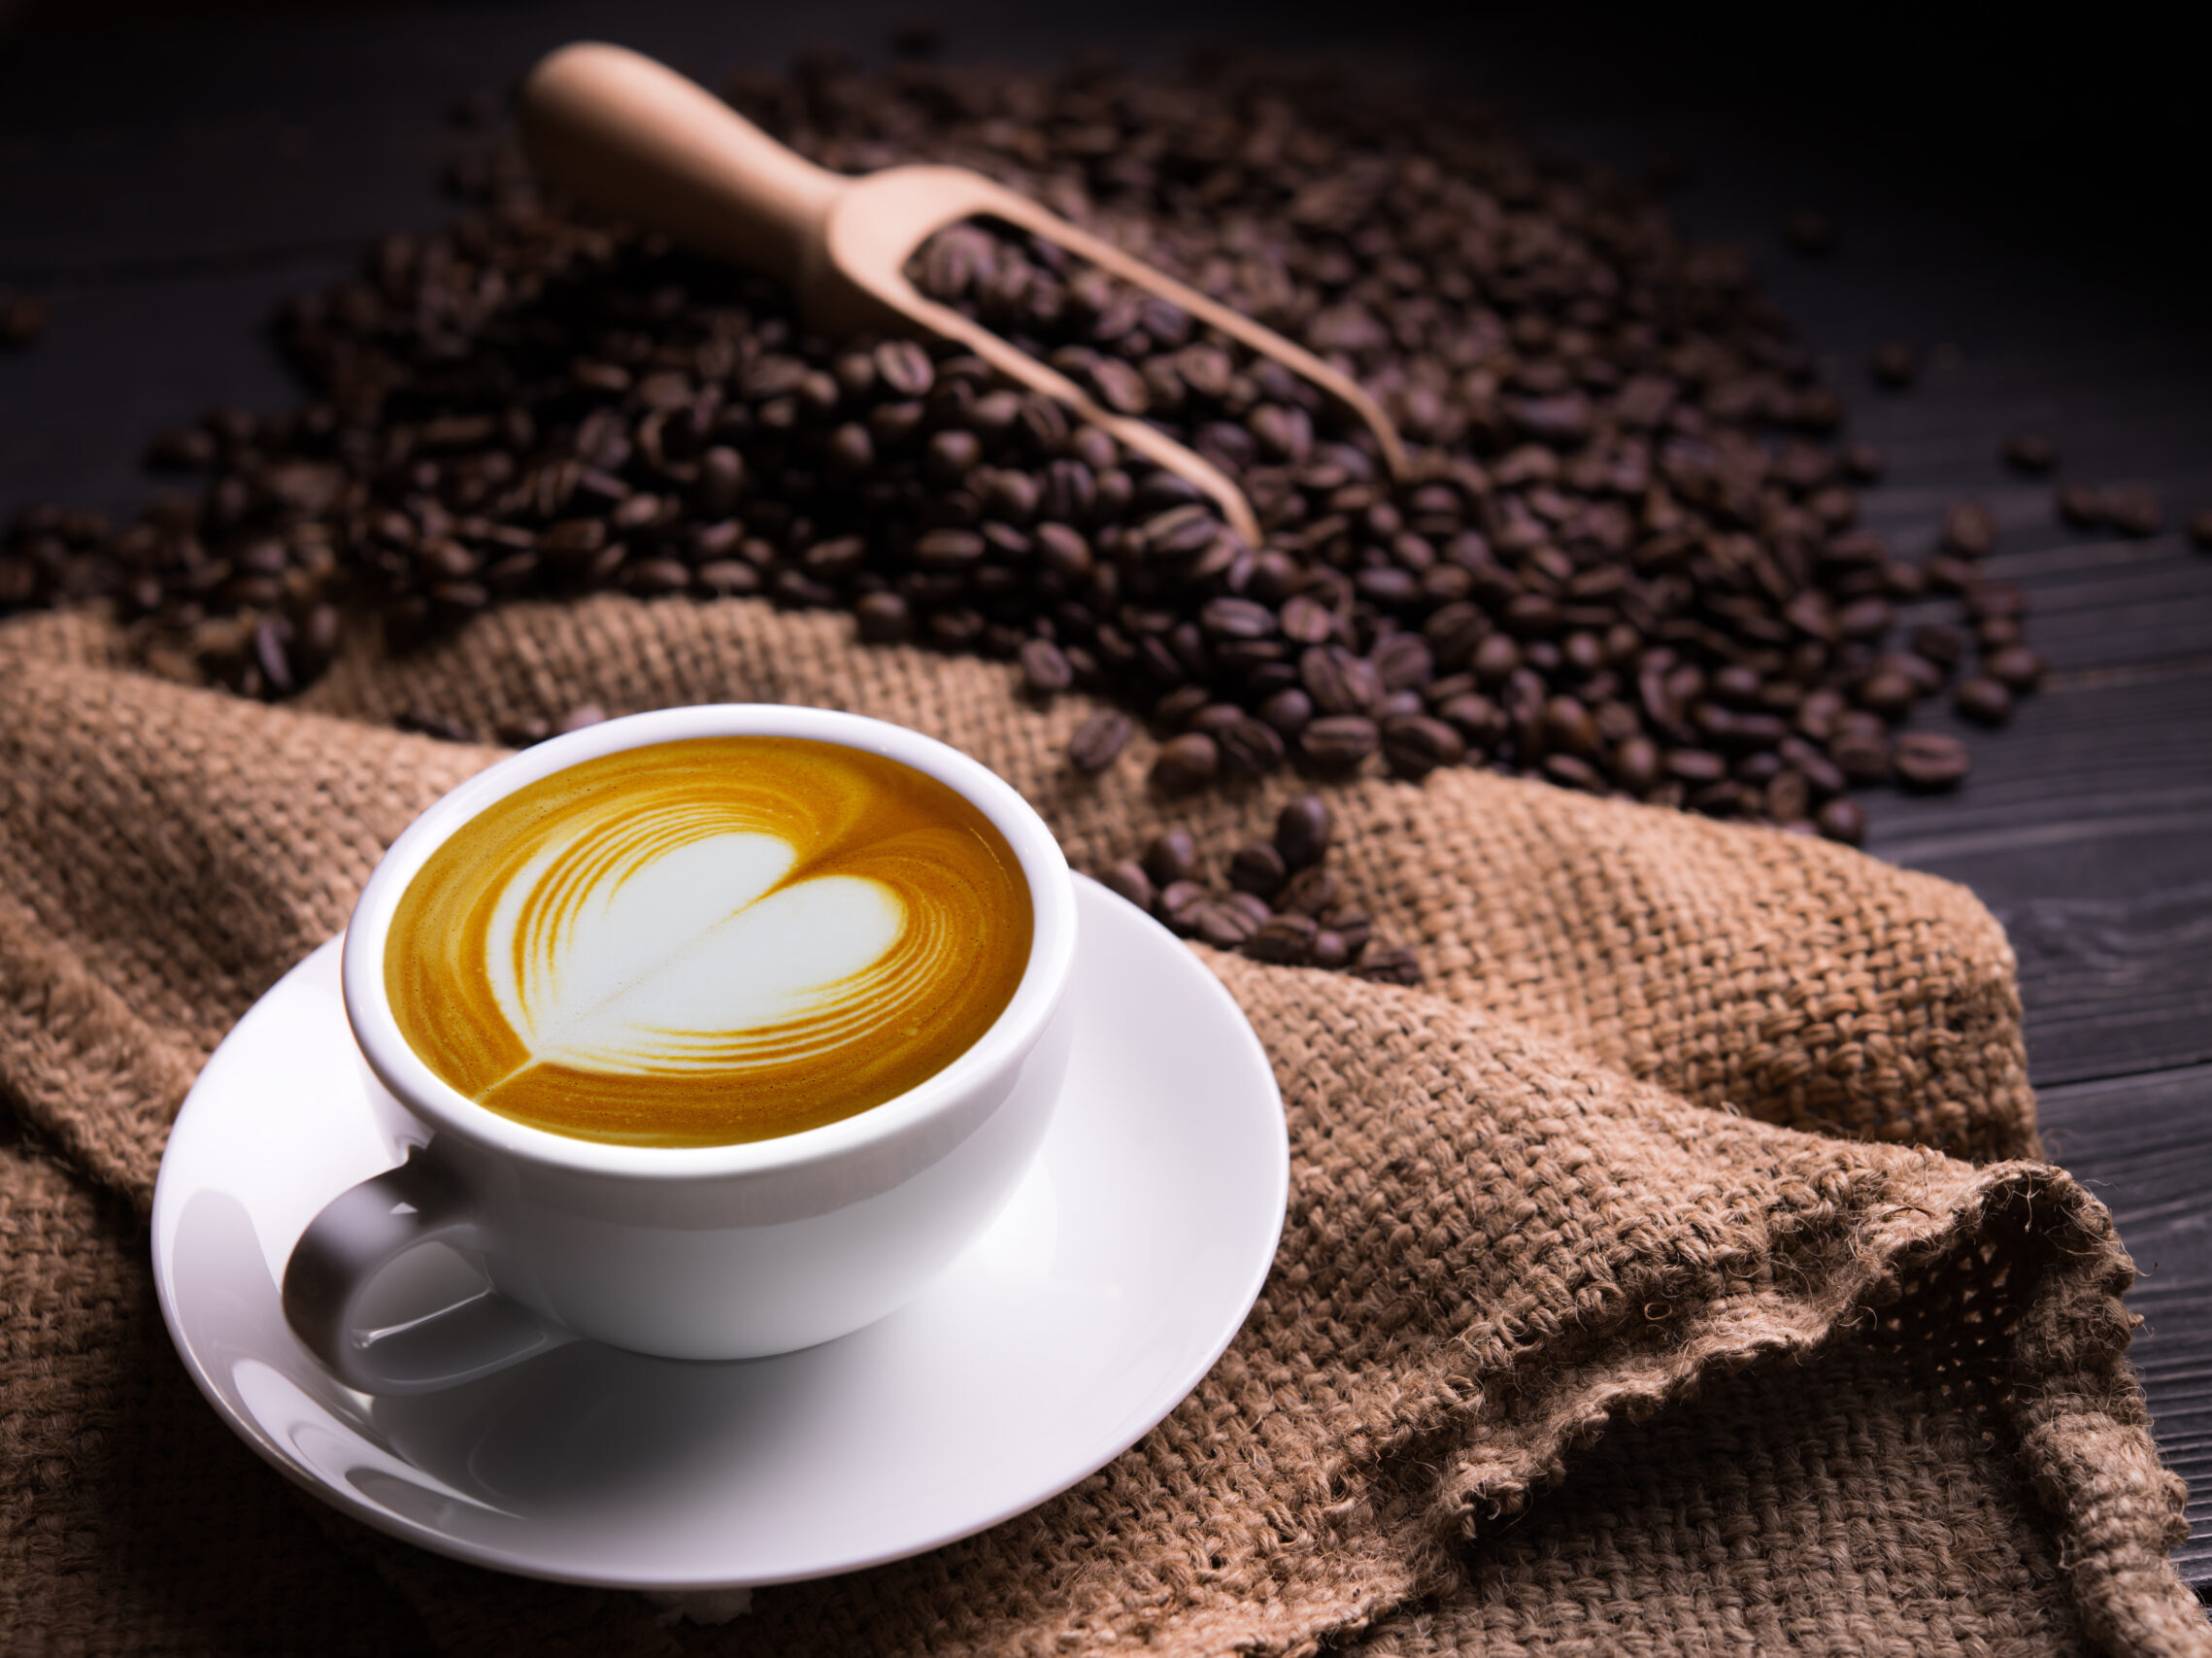 Coffee consumption of 2-3 cups per day can be linked to better heart health and longer life expectancy